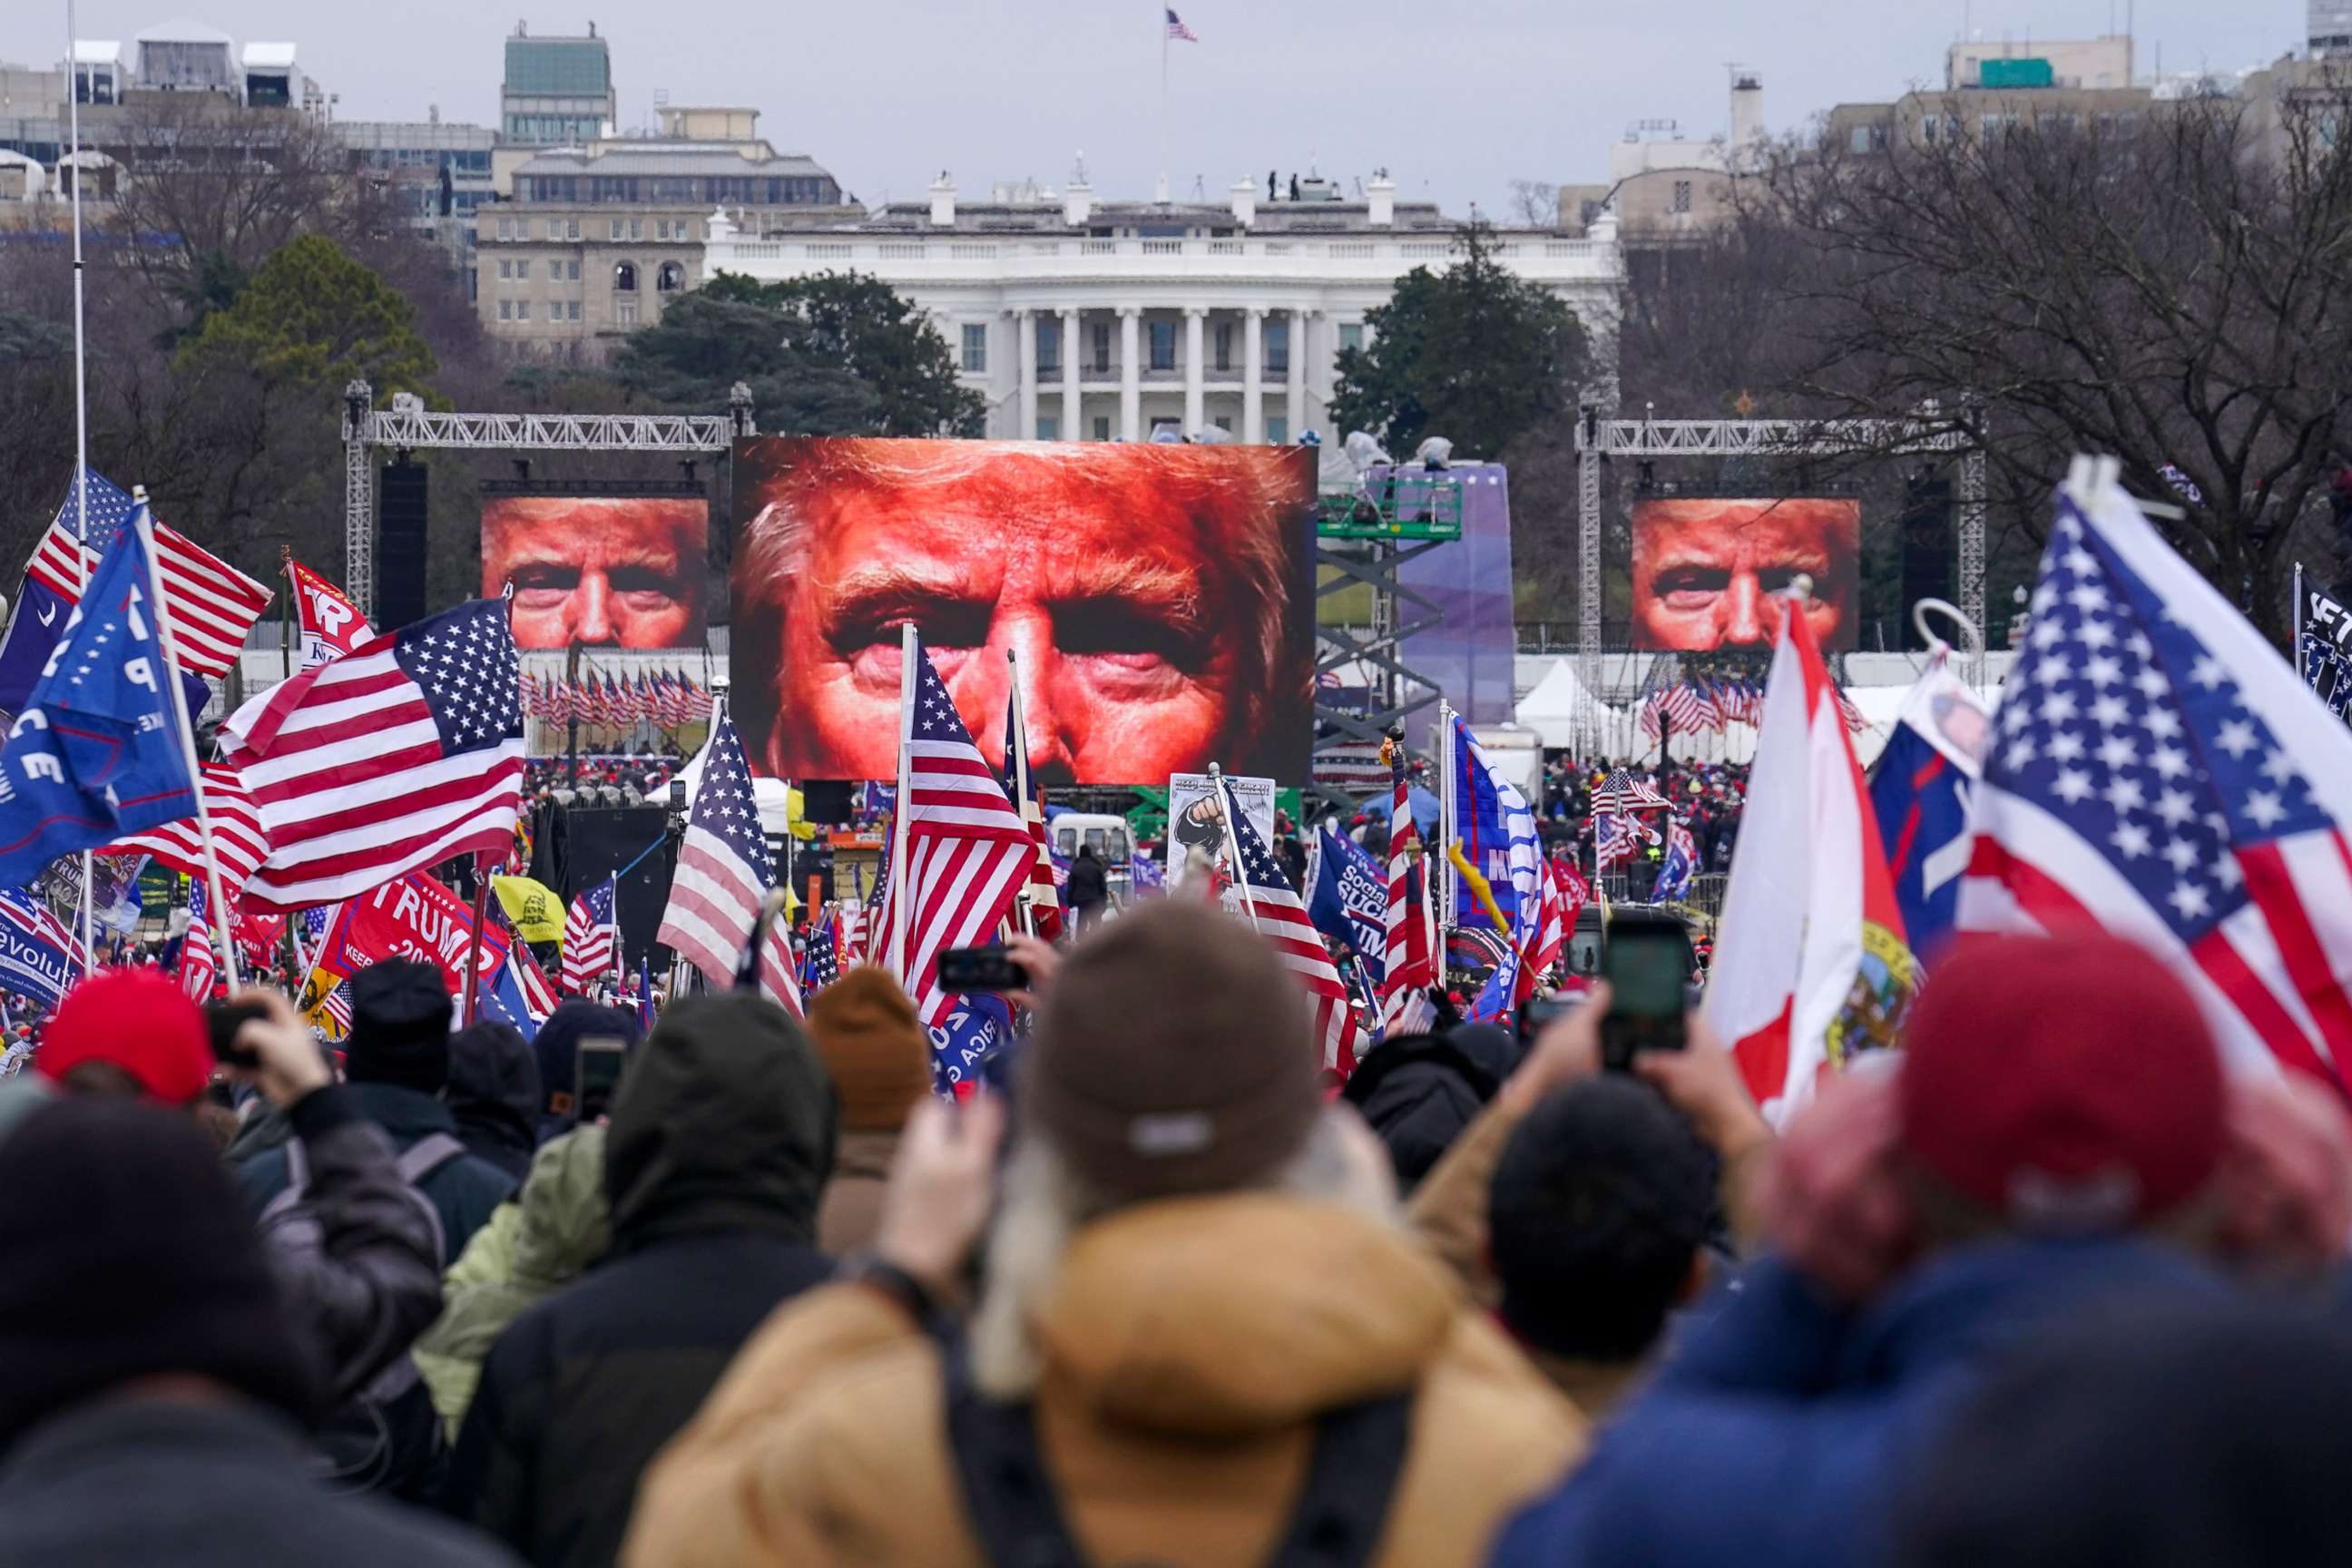 PHOTO: President Donald Trump appears on video screens in front of supporters during a rally in Washington, D.C., on the morning of Jan. 6, 2021.